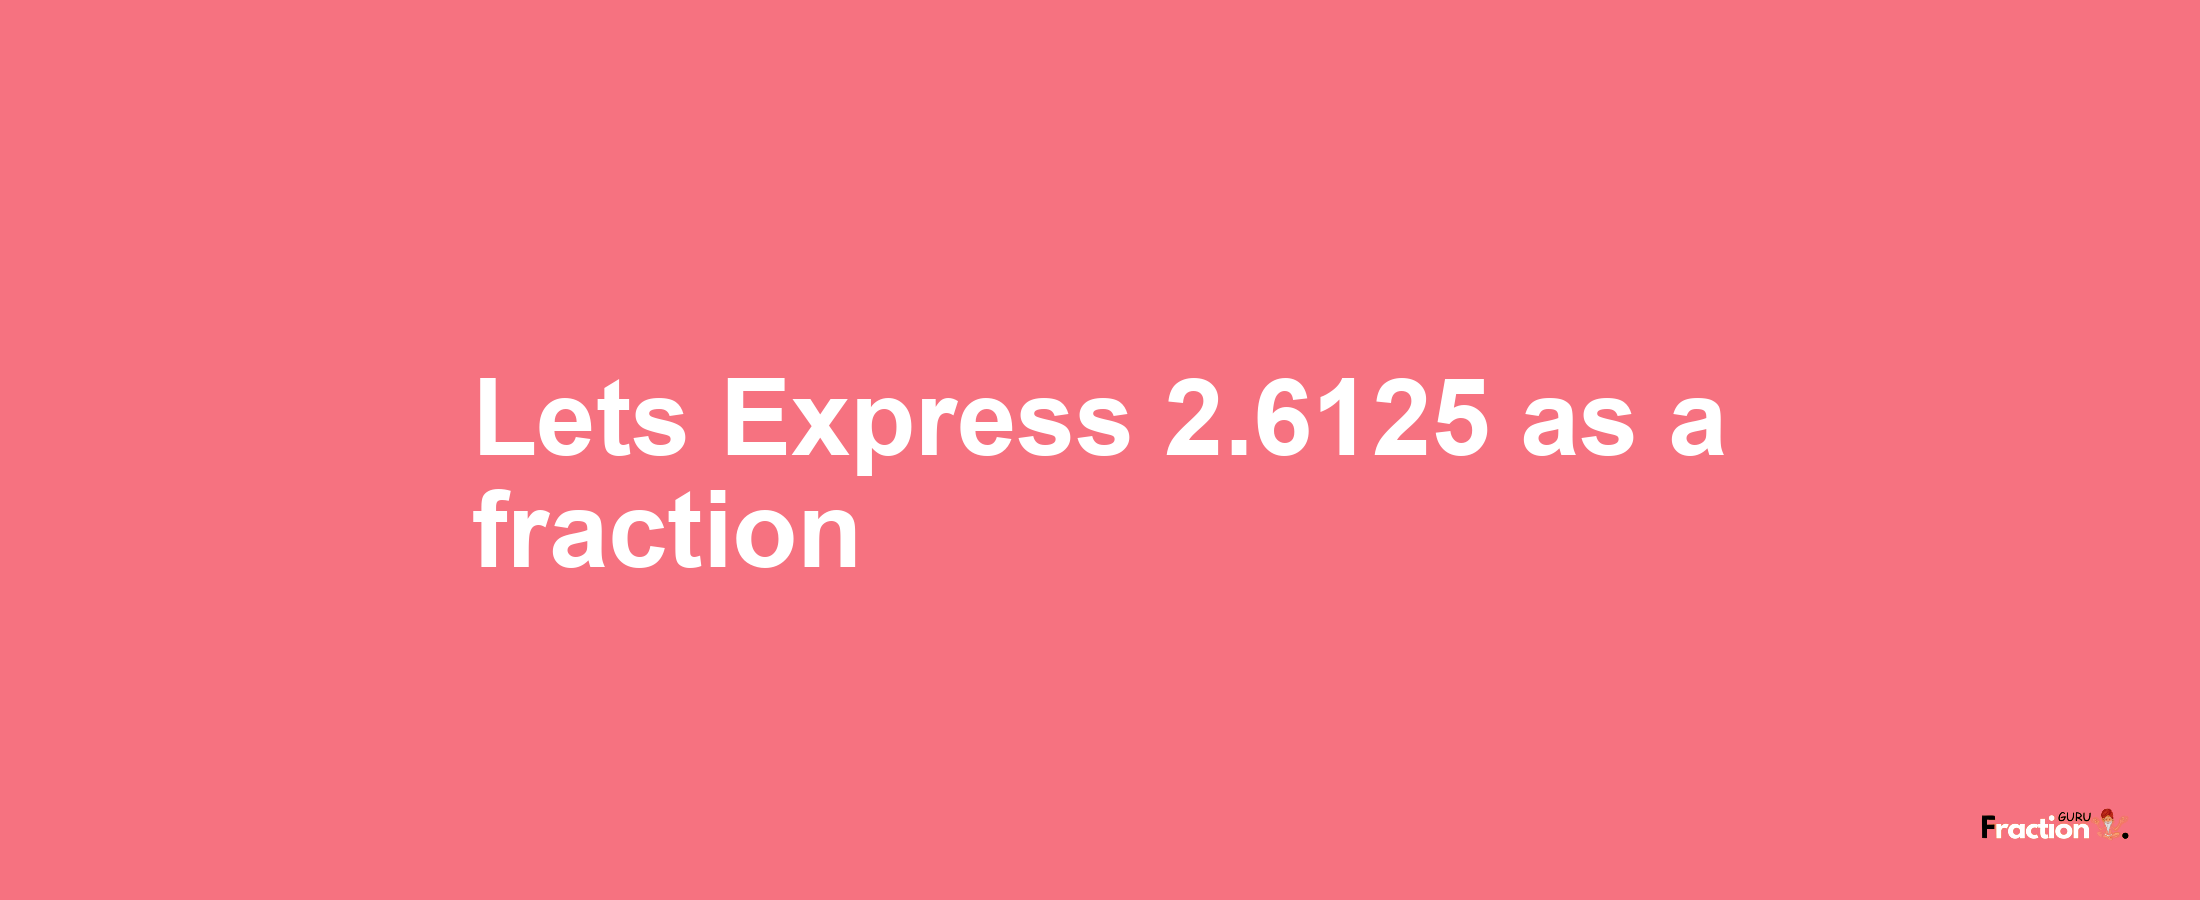 Lets Express 2.6125 as afraction